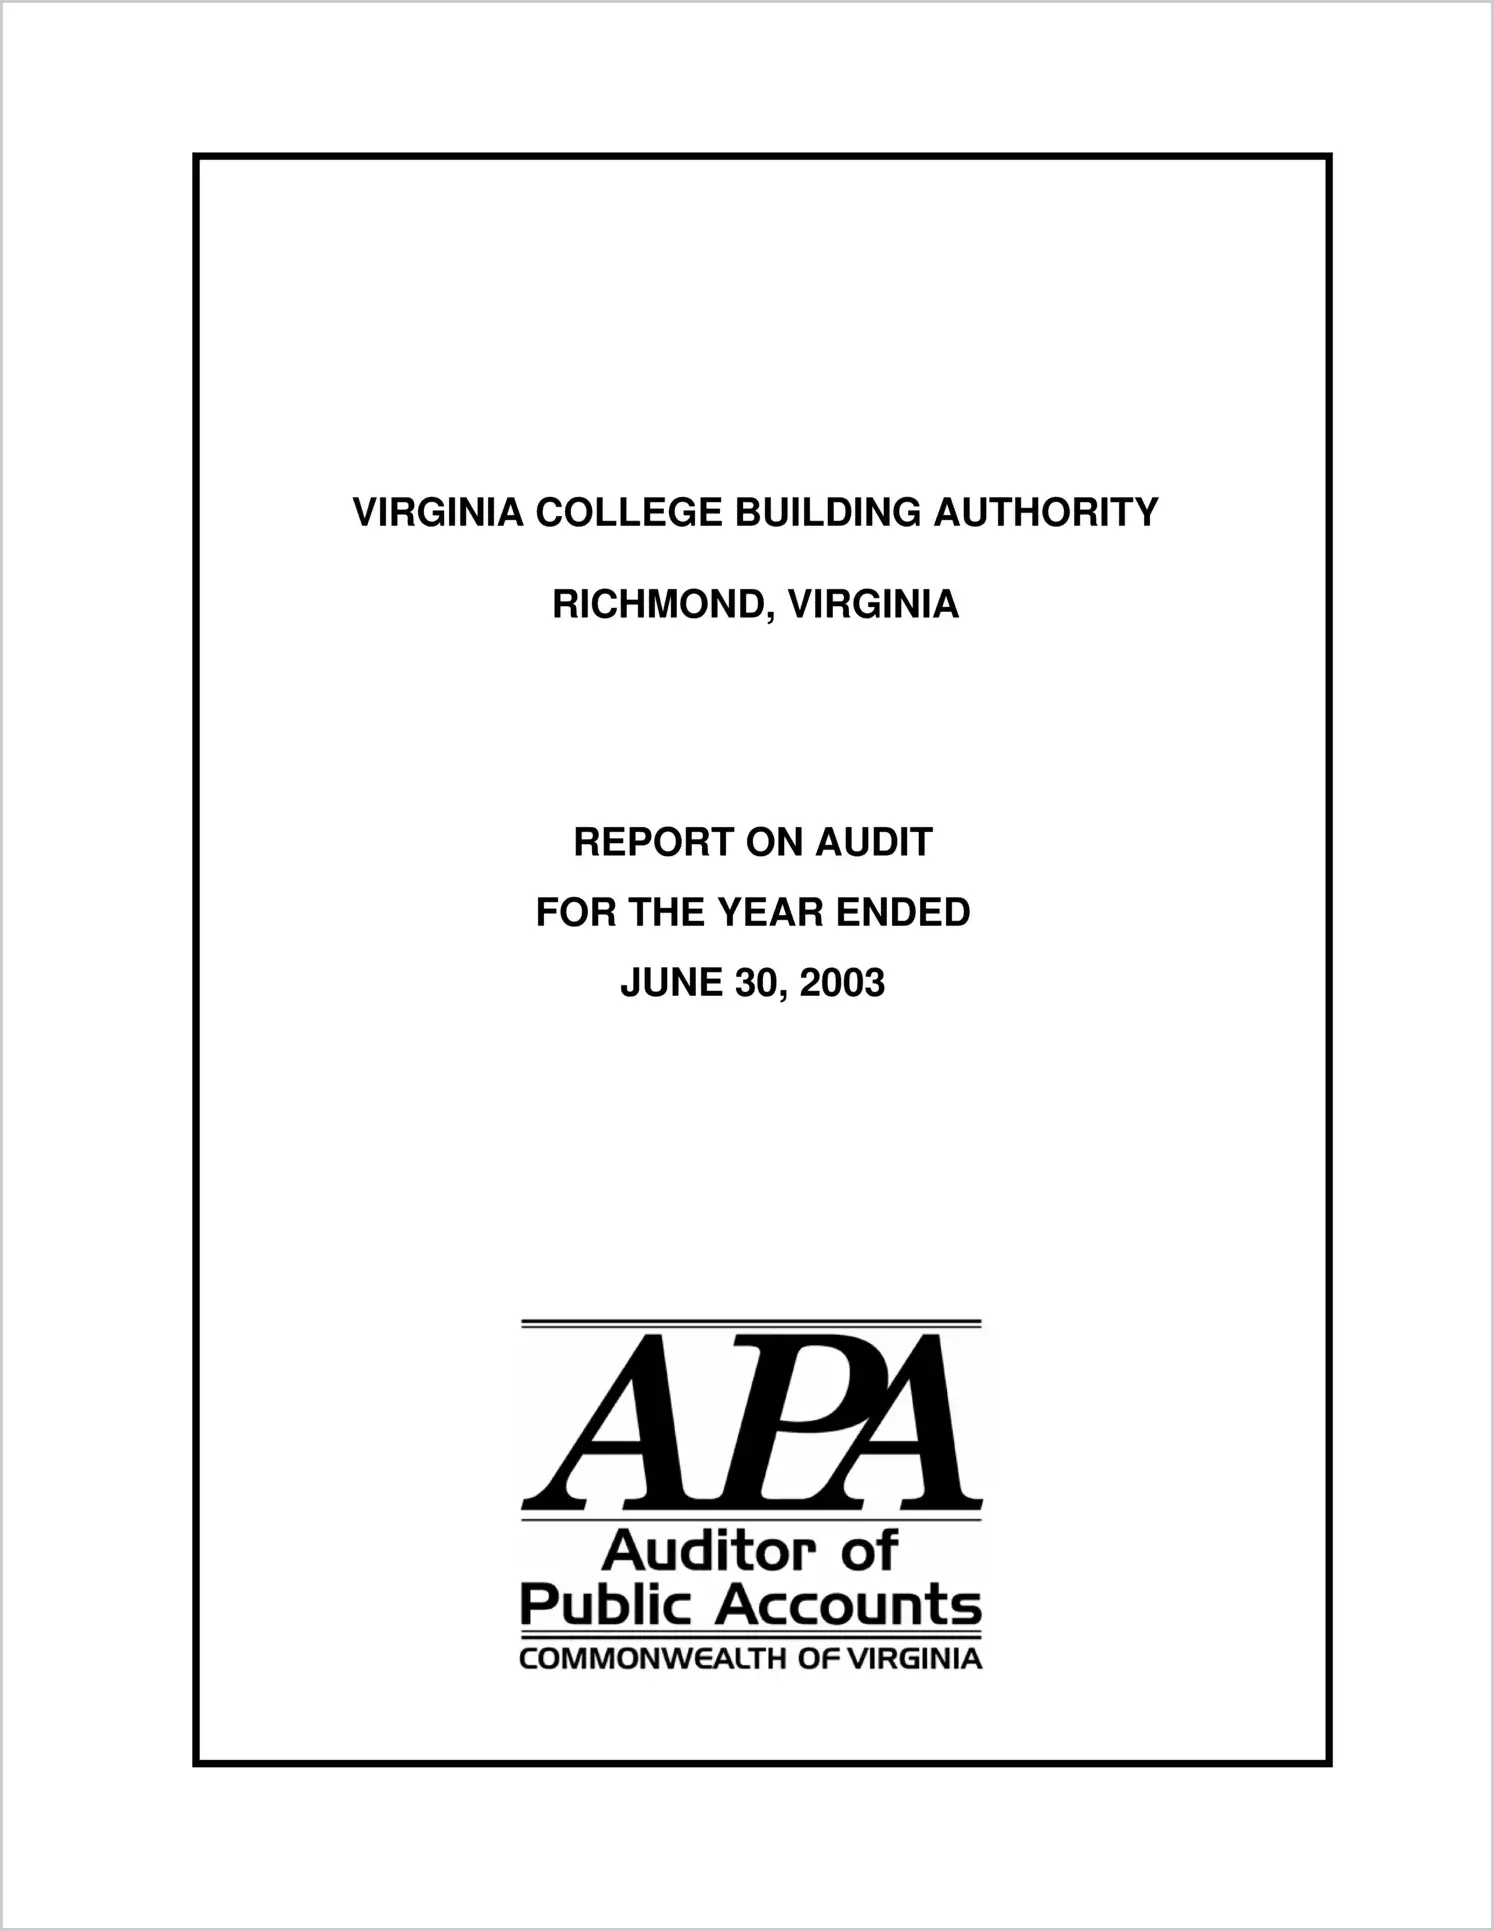 Virginia College Building Authority for the year ended June 30, 2003